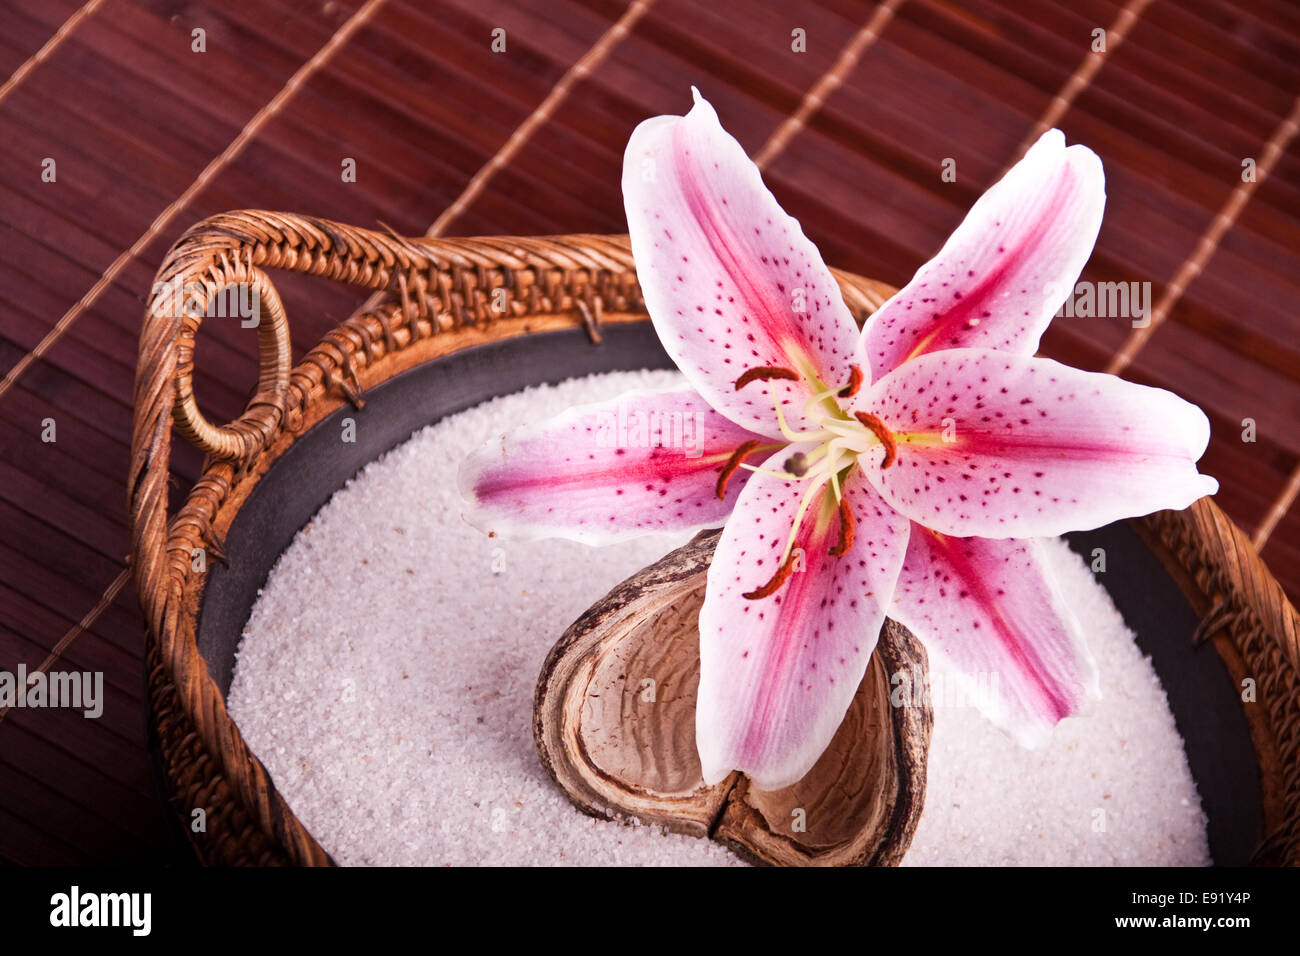 Bowl with sand and pink lily Stock Photo